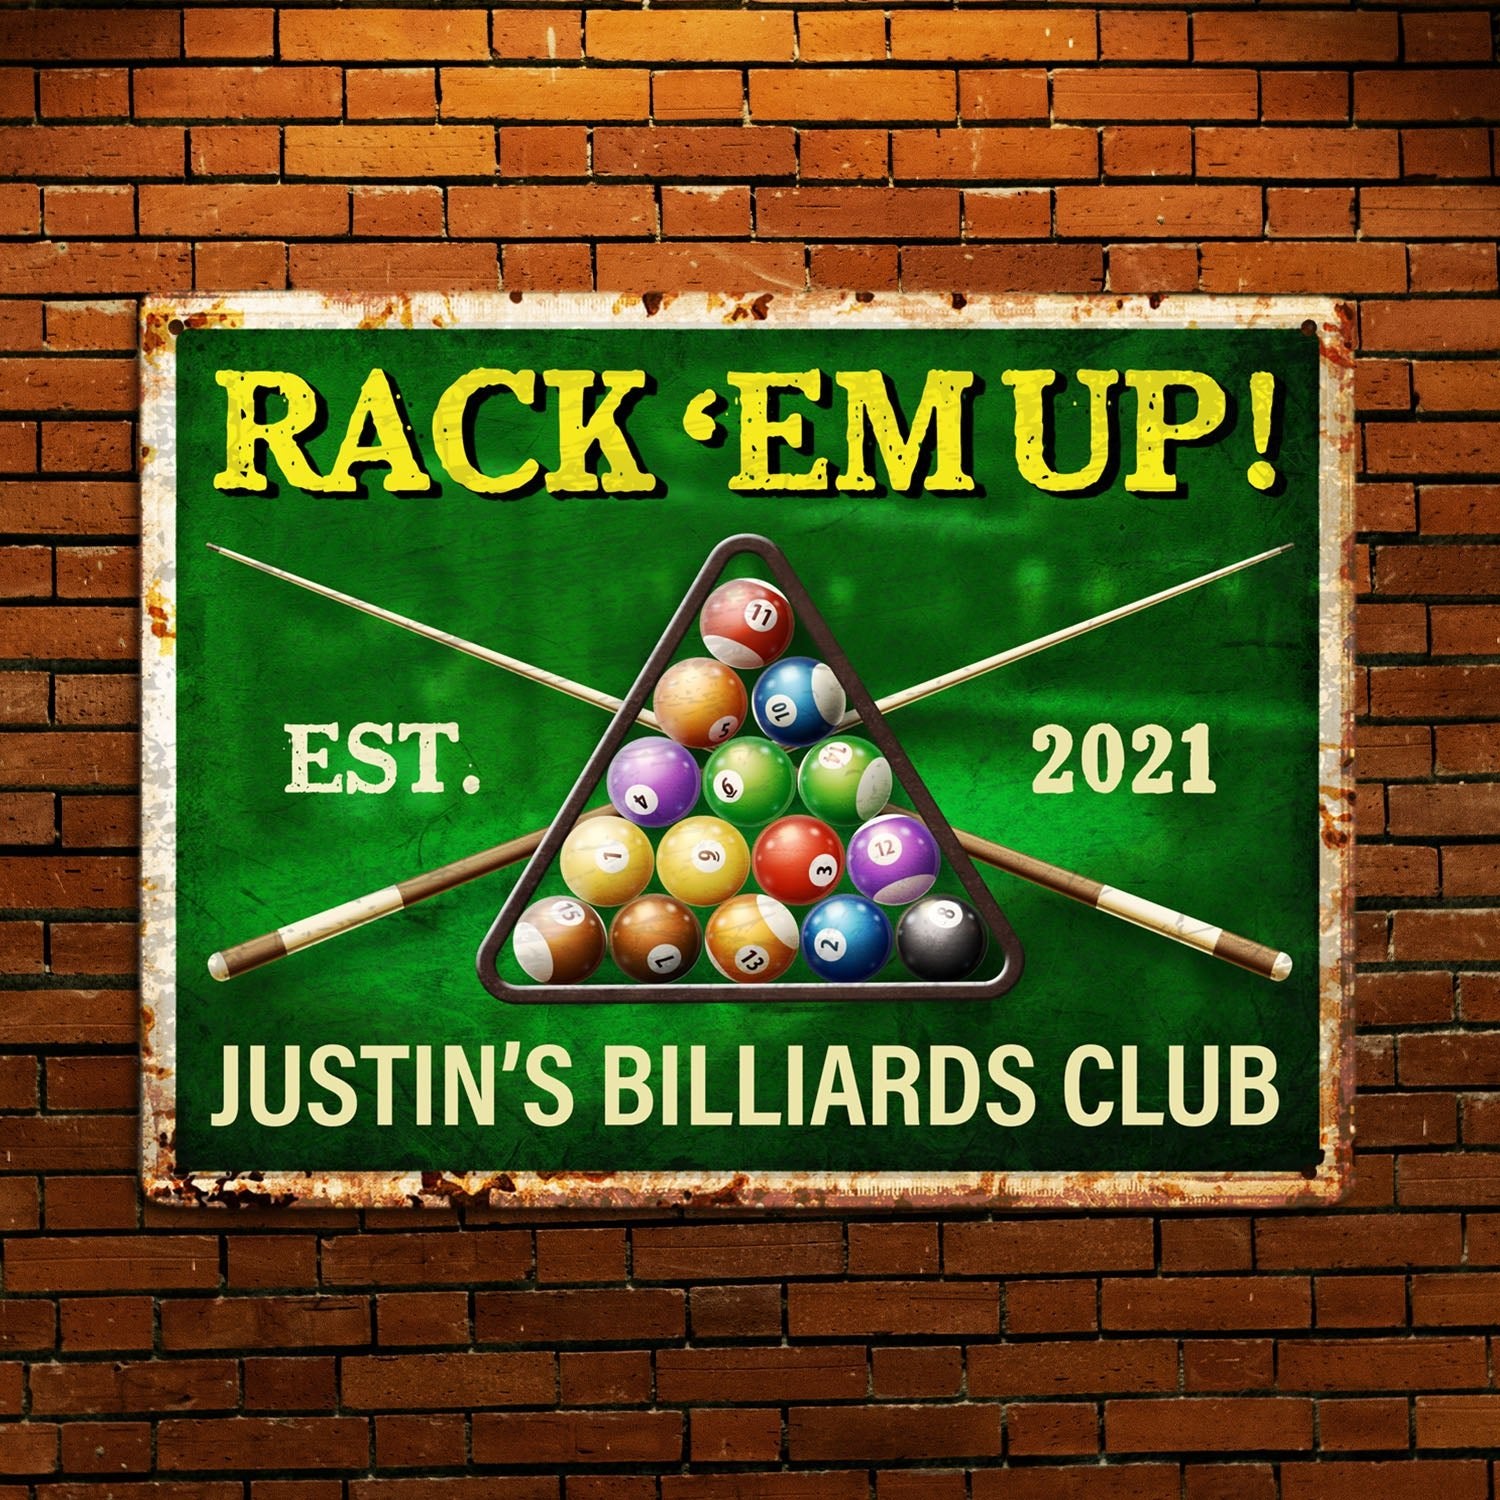 Rack 'Em Up, Custom Billiards Club Sign, Personalized Name And Year